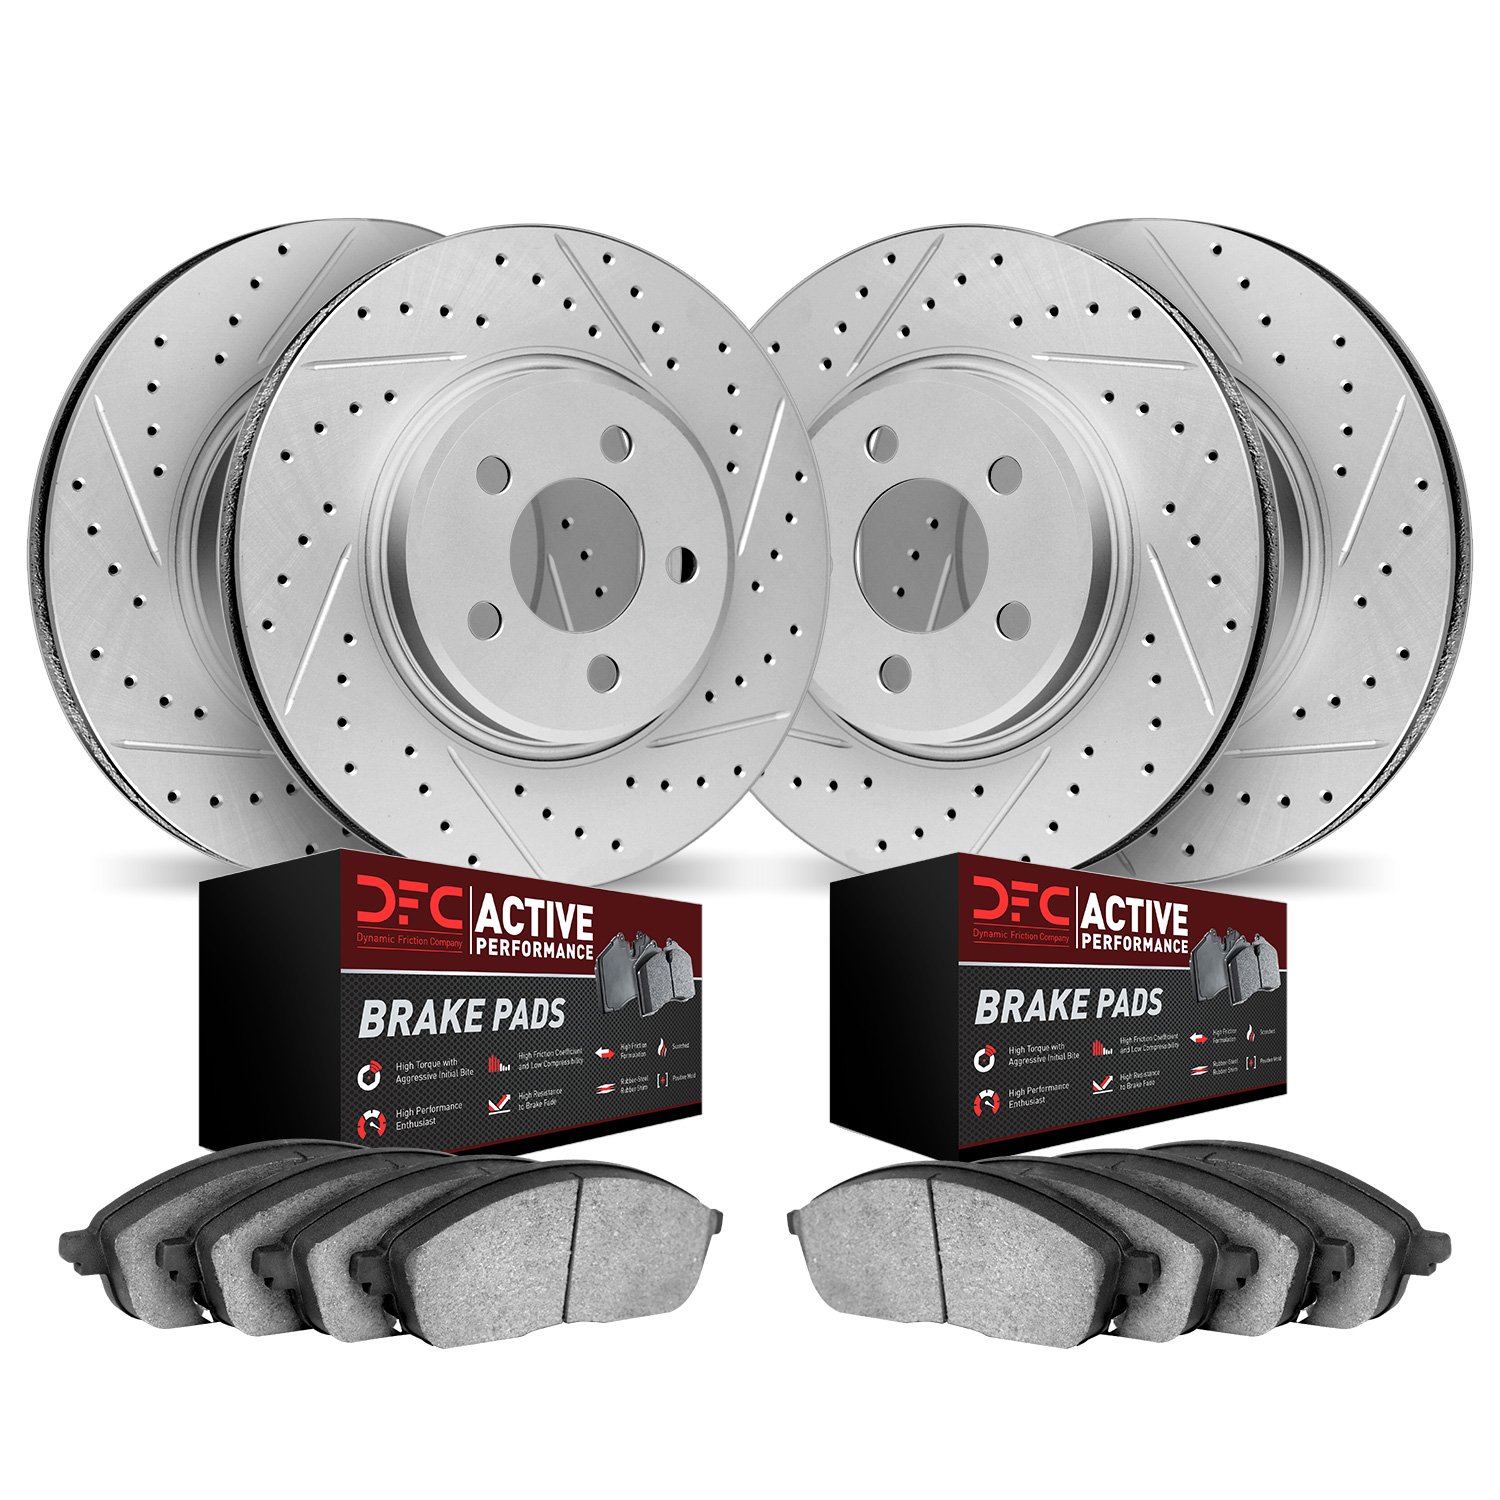 2704-45000 Geoperformance Drilled/Slotted Brake Rotors with Active Performance Pads Kit, 1998-2002 GM, Position: Front and Rear